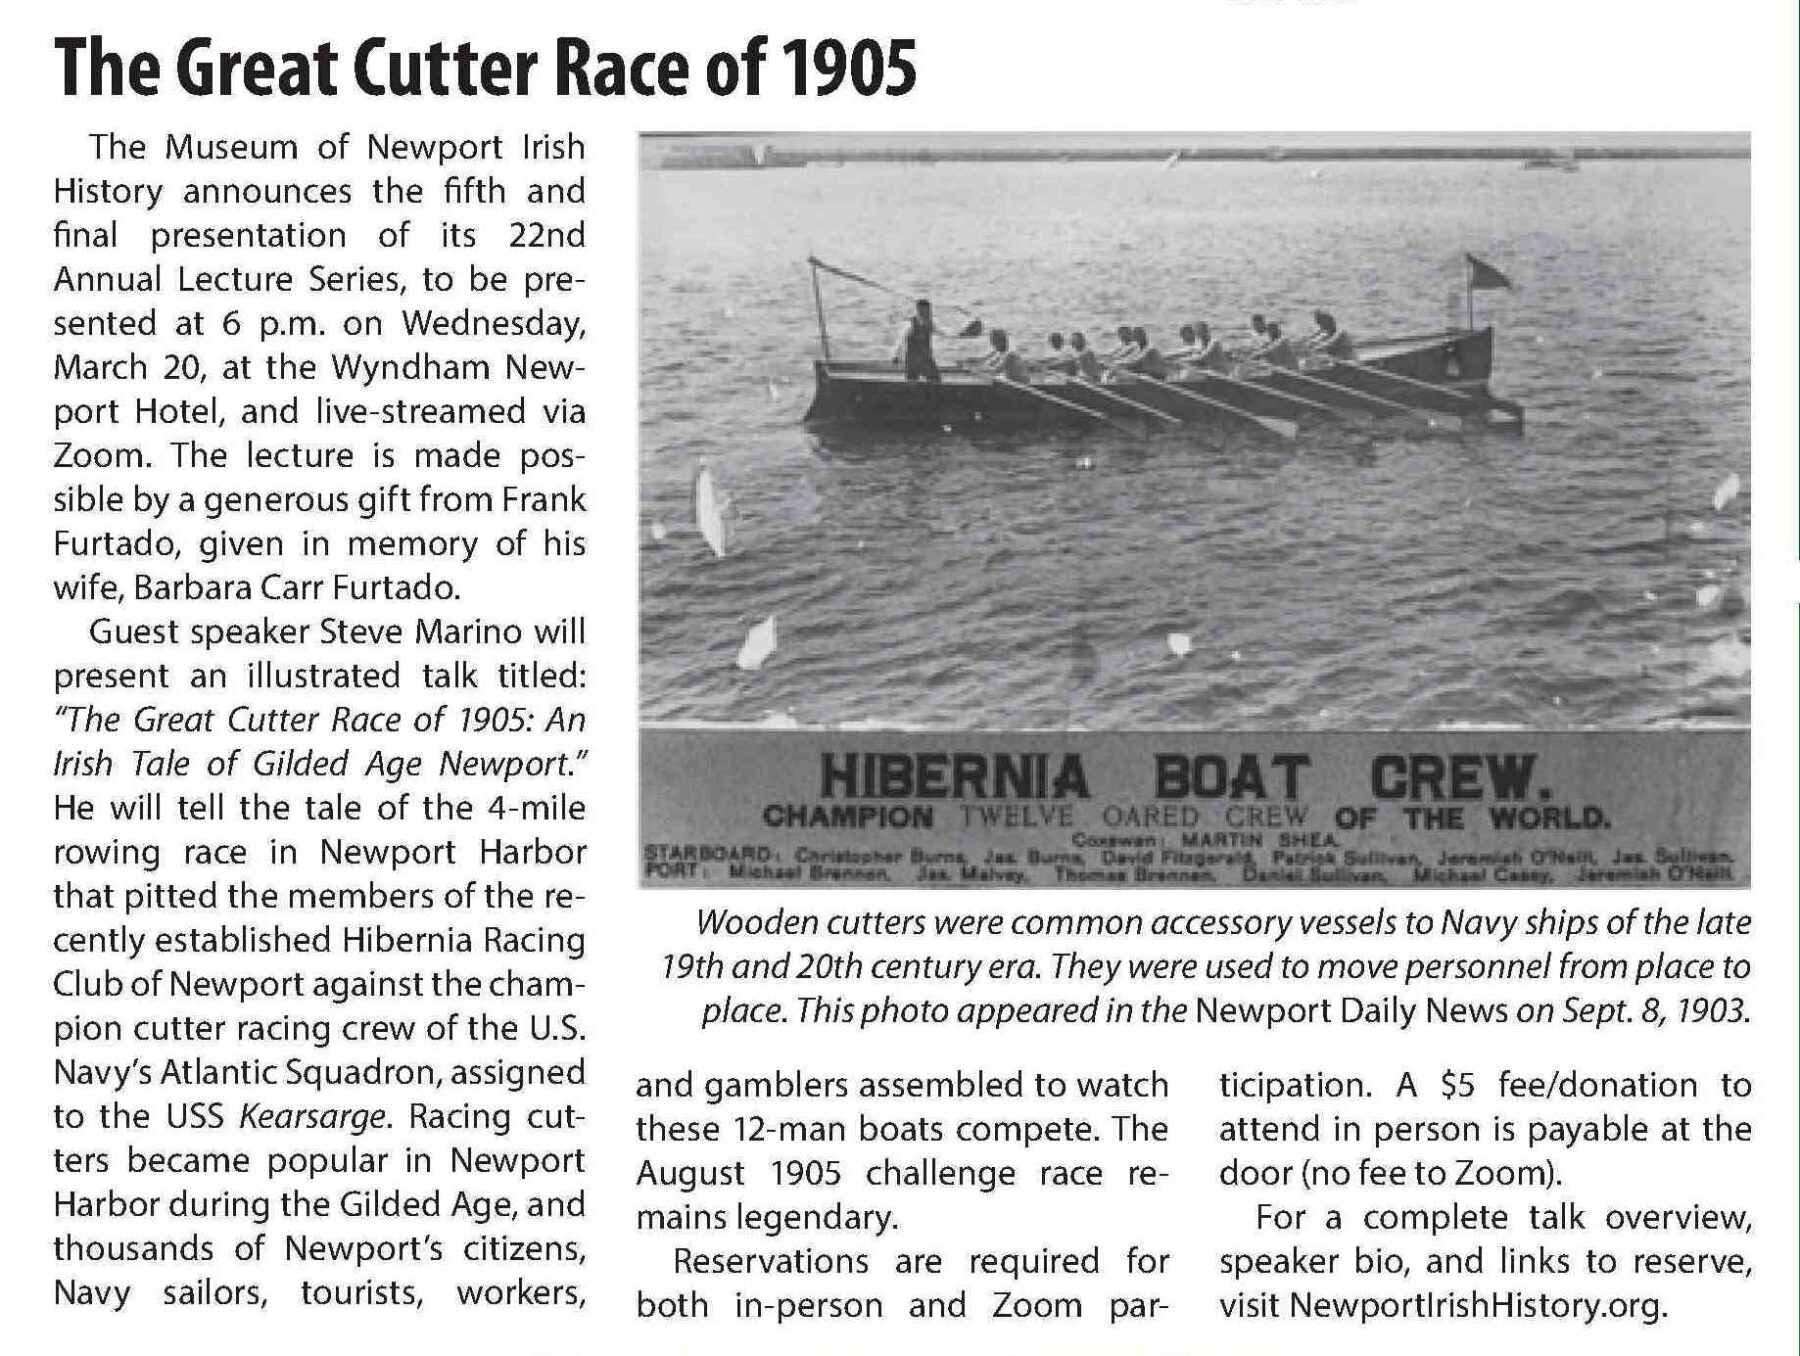 Newport This Week: “The Great Cutter Race of 1905